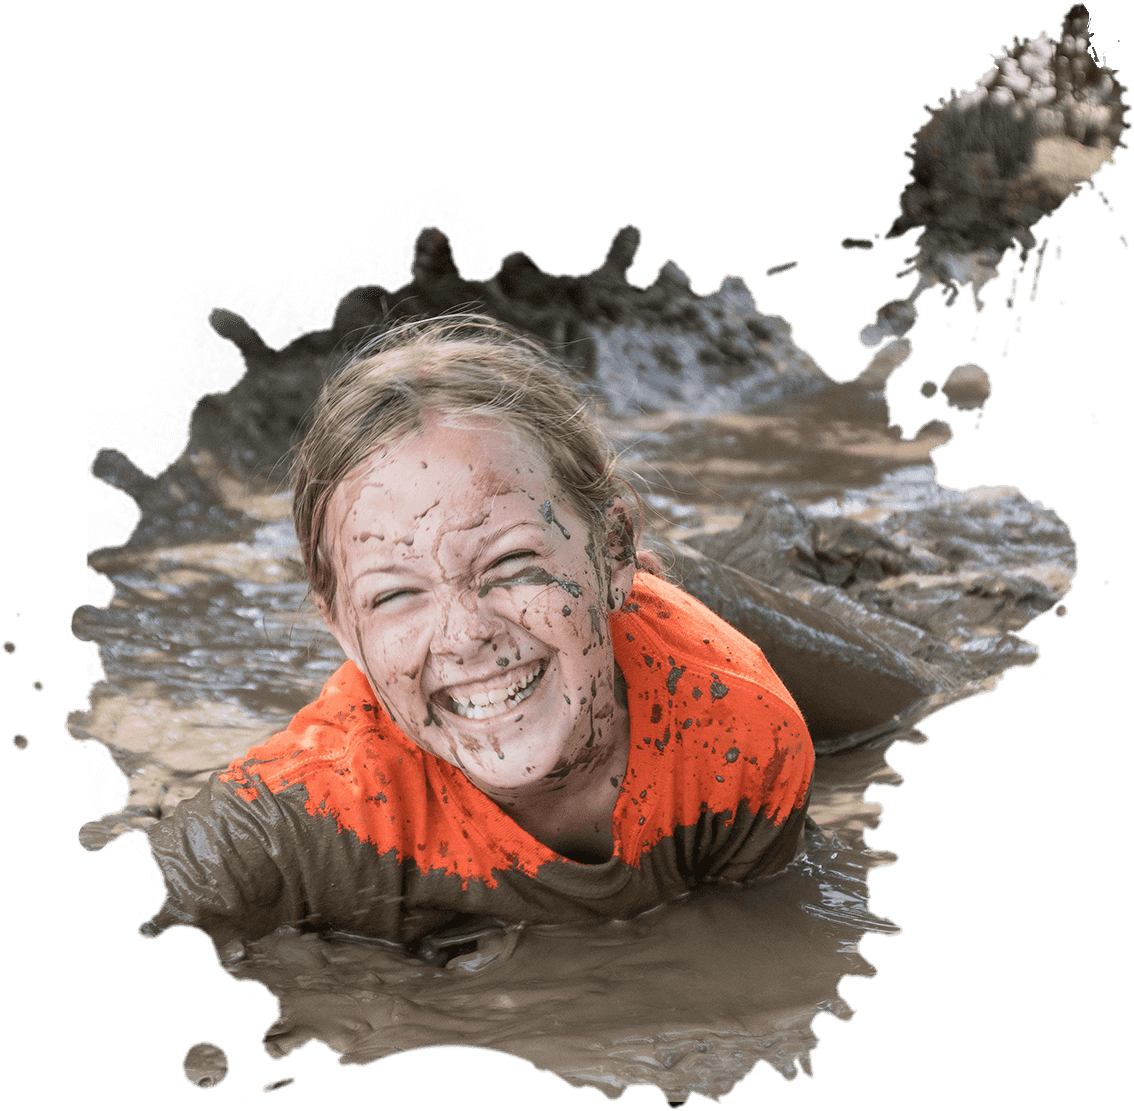 A Girl In A Mud Puddle